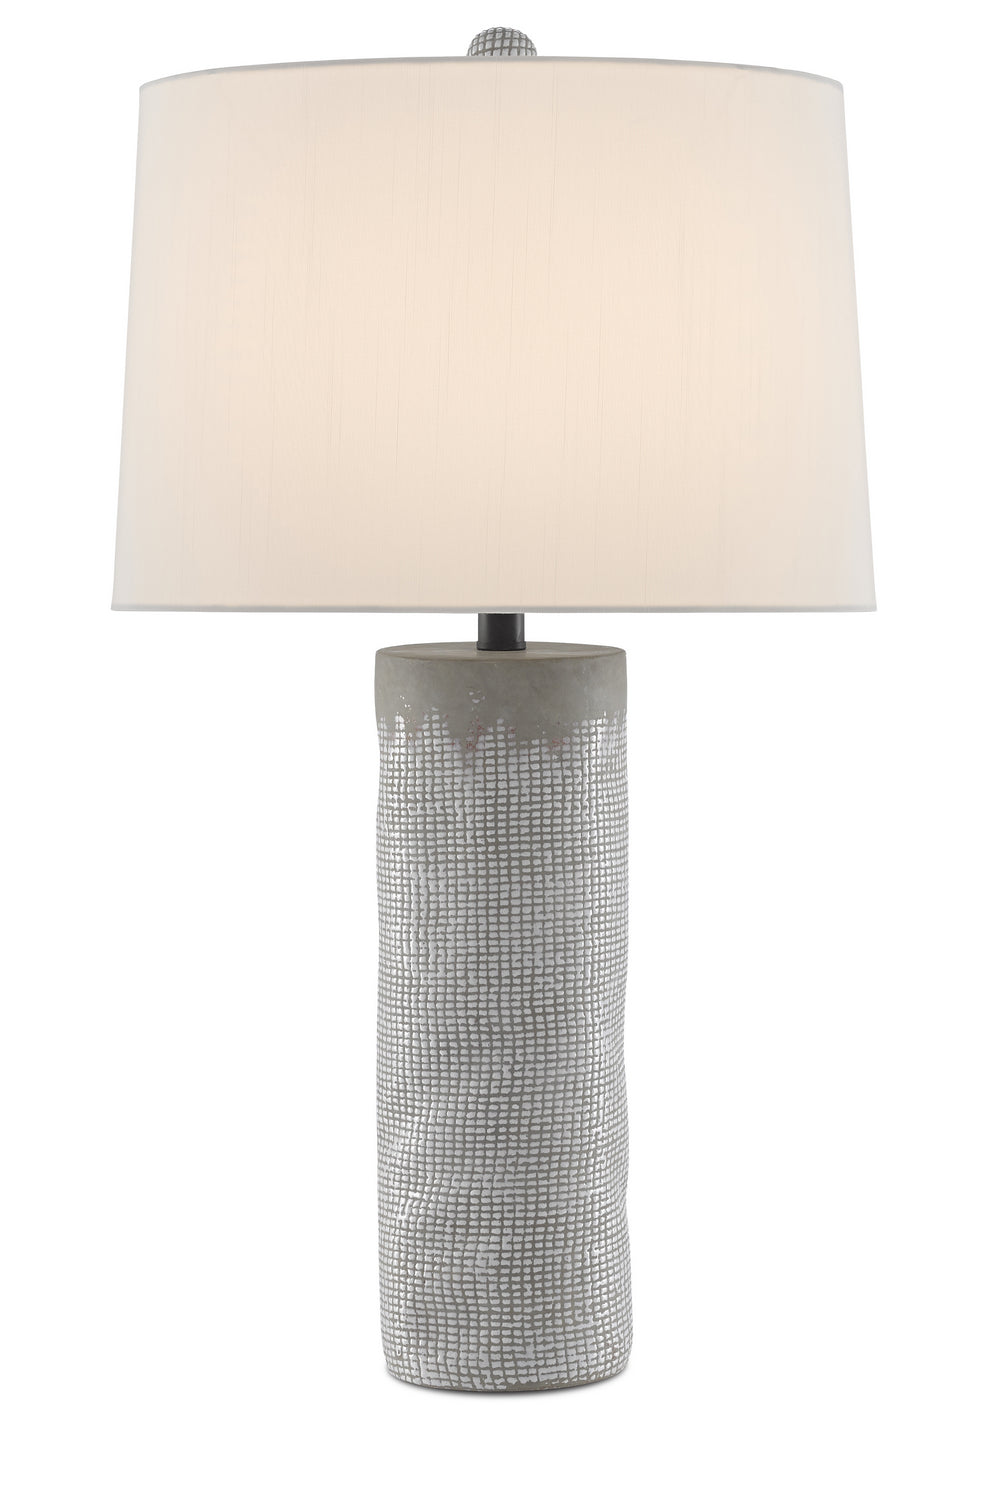 One Light Table Lamp from the Perla collection in Concrete/White/Satin Black finish